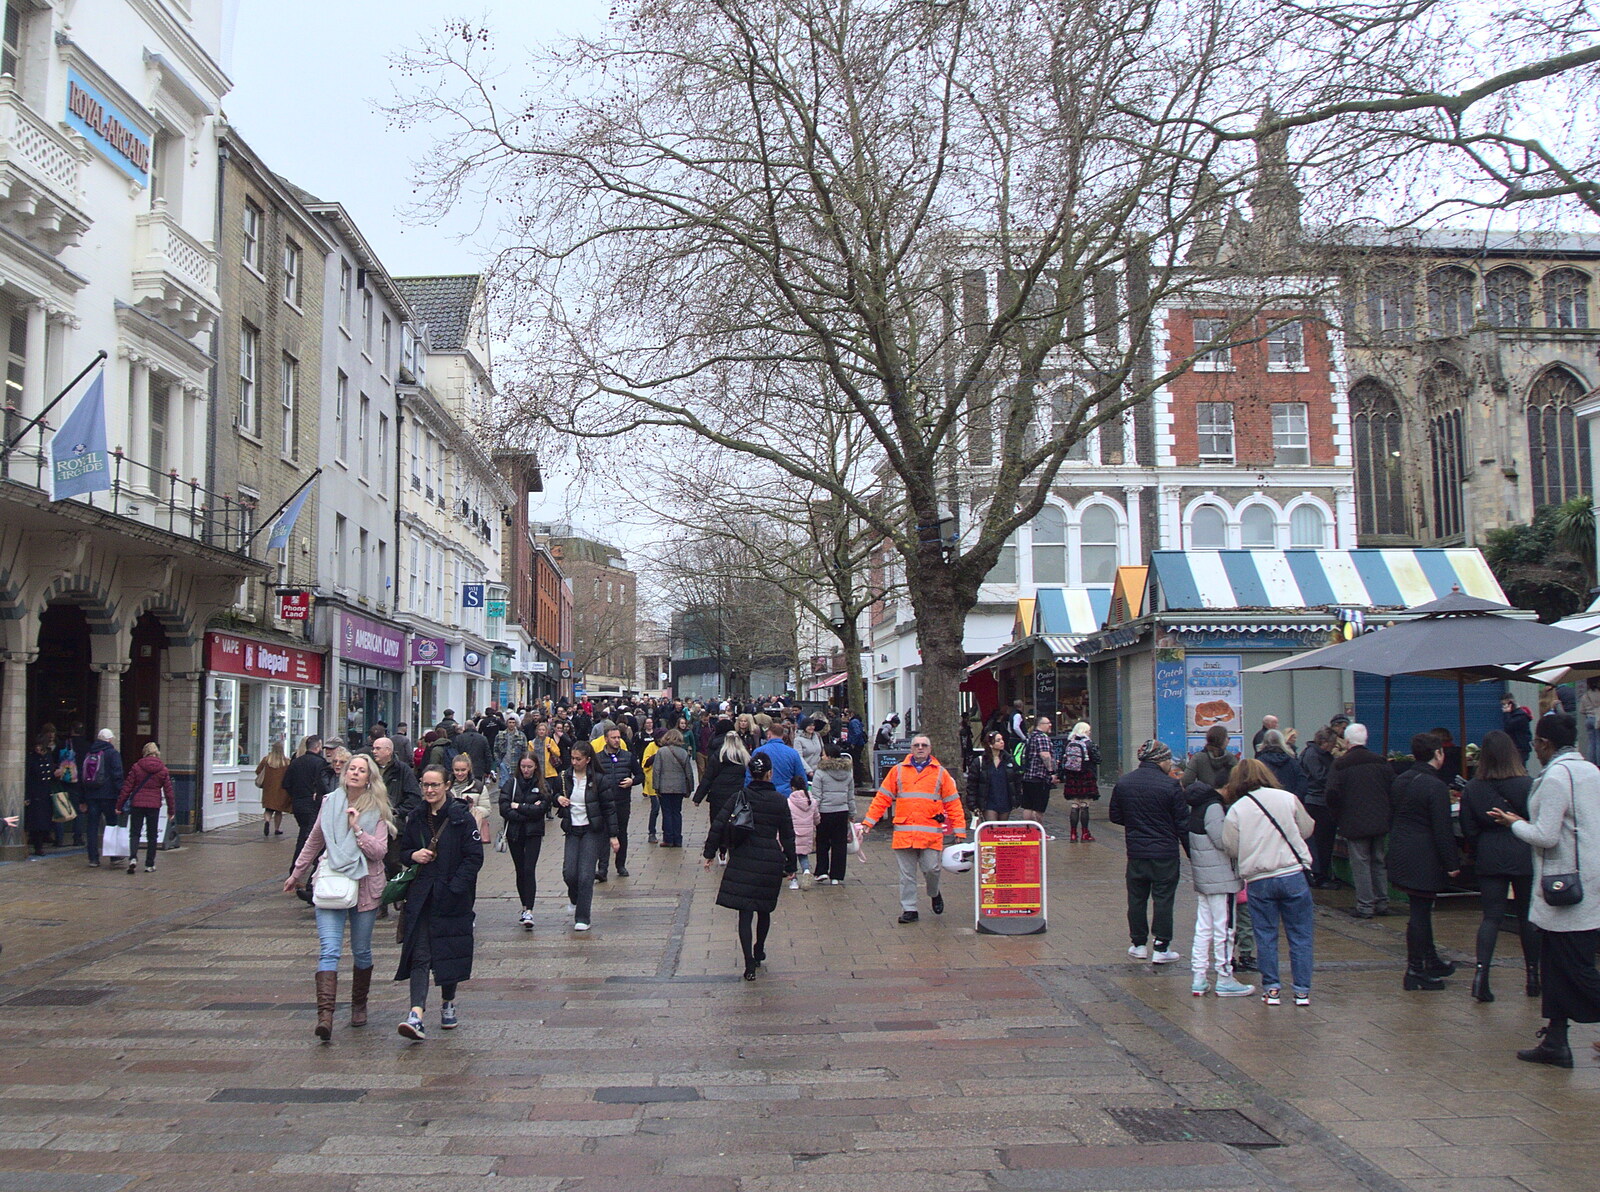 A damp Gentleman's Walk in Norwich from It's a Stitch Up: A Trip to Norwich, Norfolk - 18th March 2023